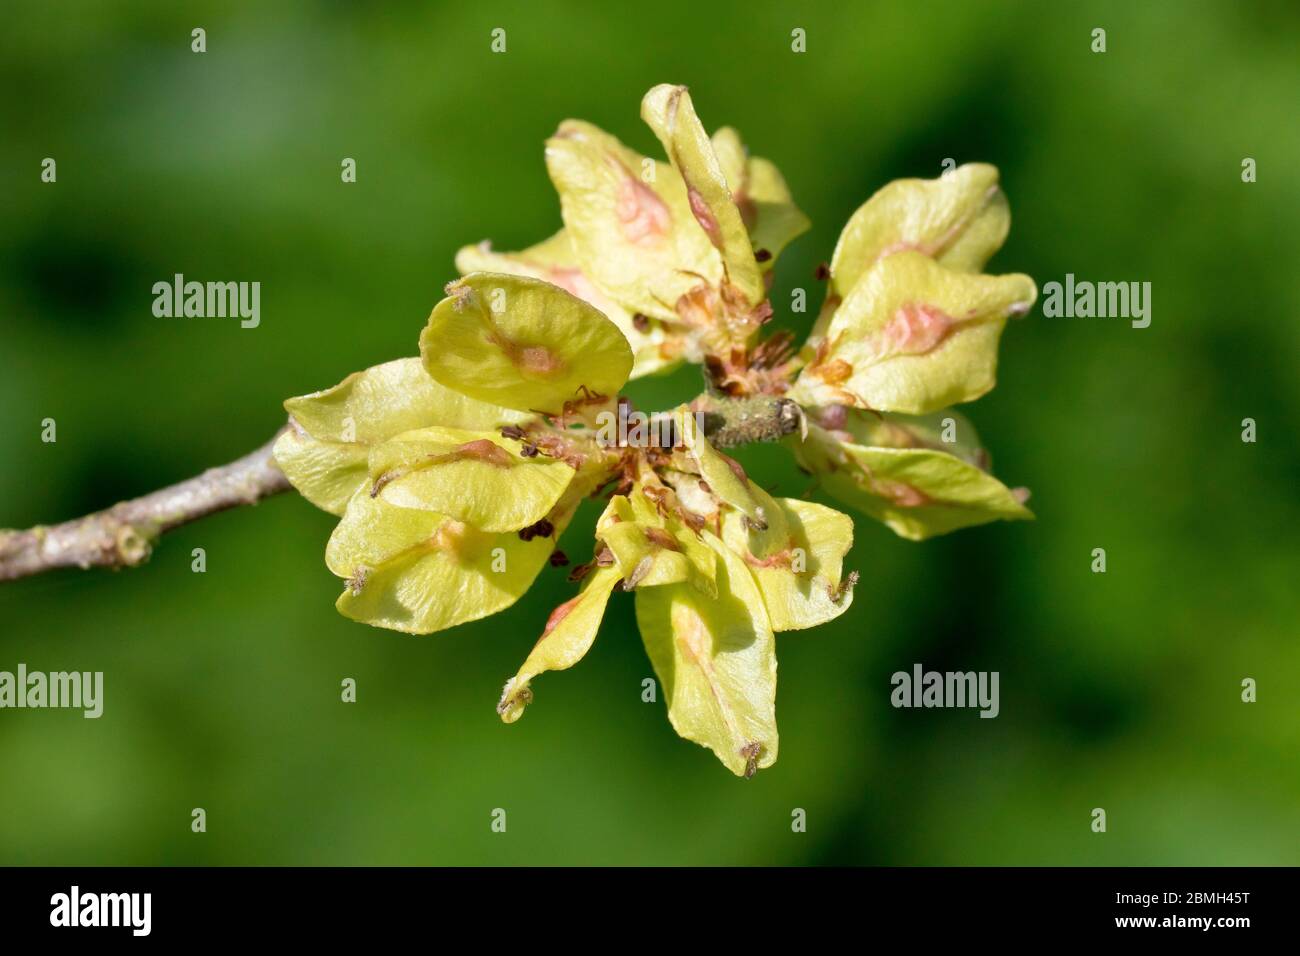 Wych Elm (ulmus glabra), close up of the oval shaped seeds or fruits produced in late spring, isolated against a plain out of focus background. Stock Photo